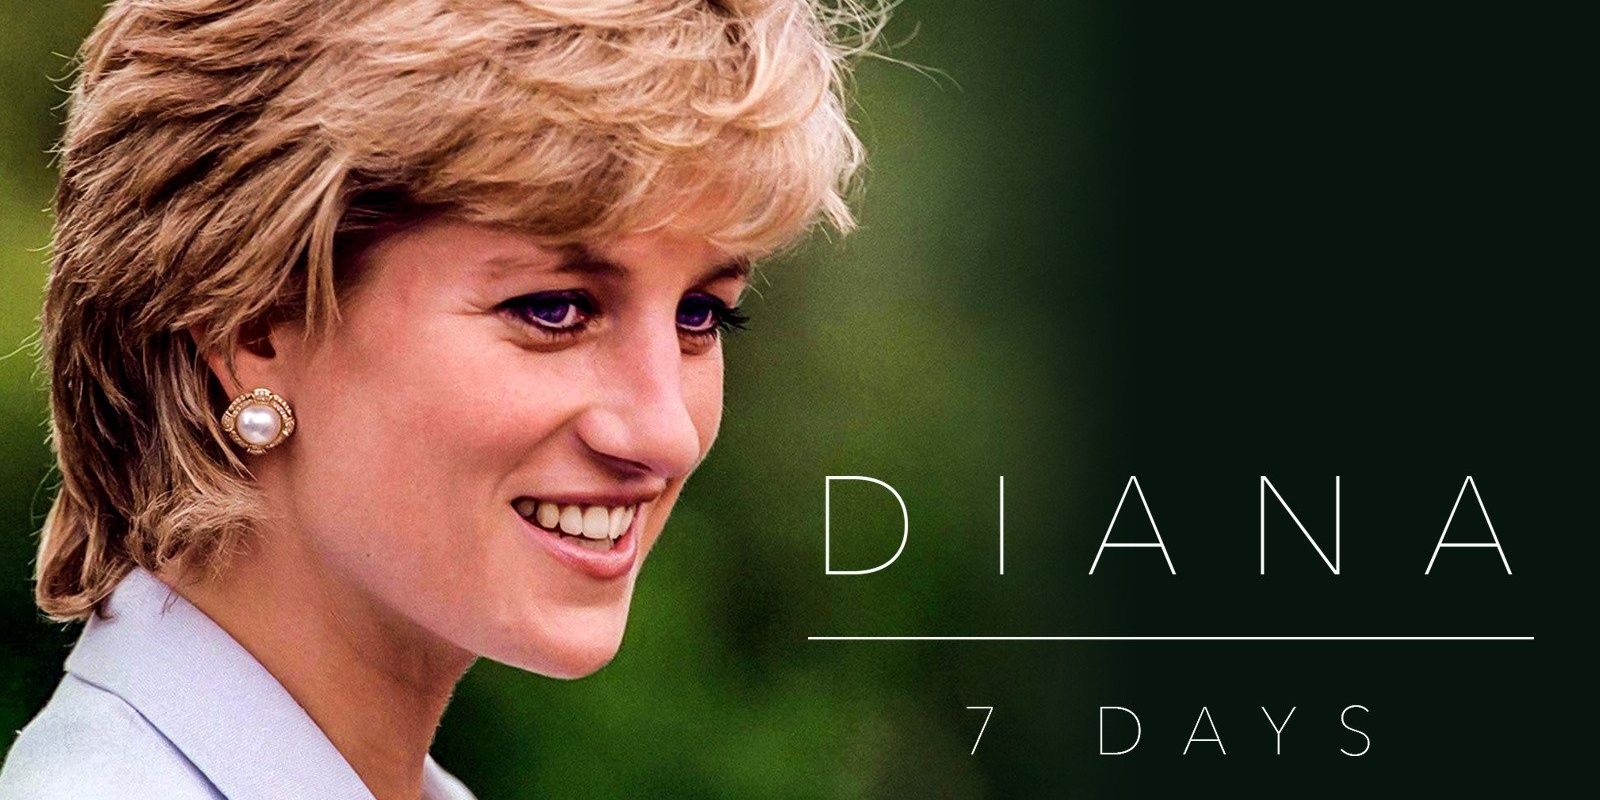 Poster for Diana 7 Days featuring a side shot of Princess Diana smiling